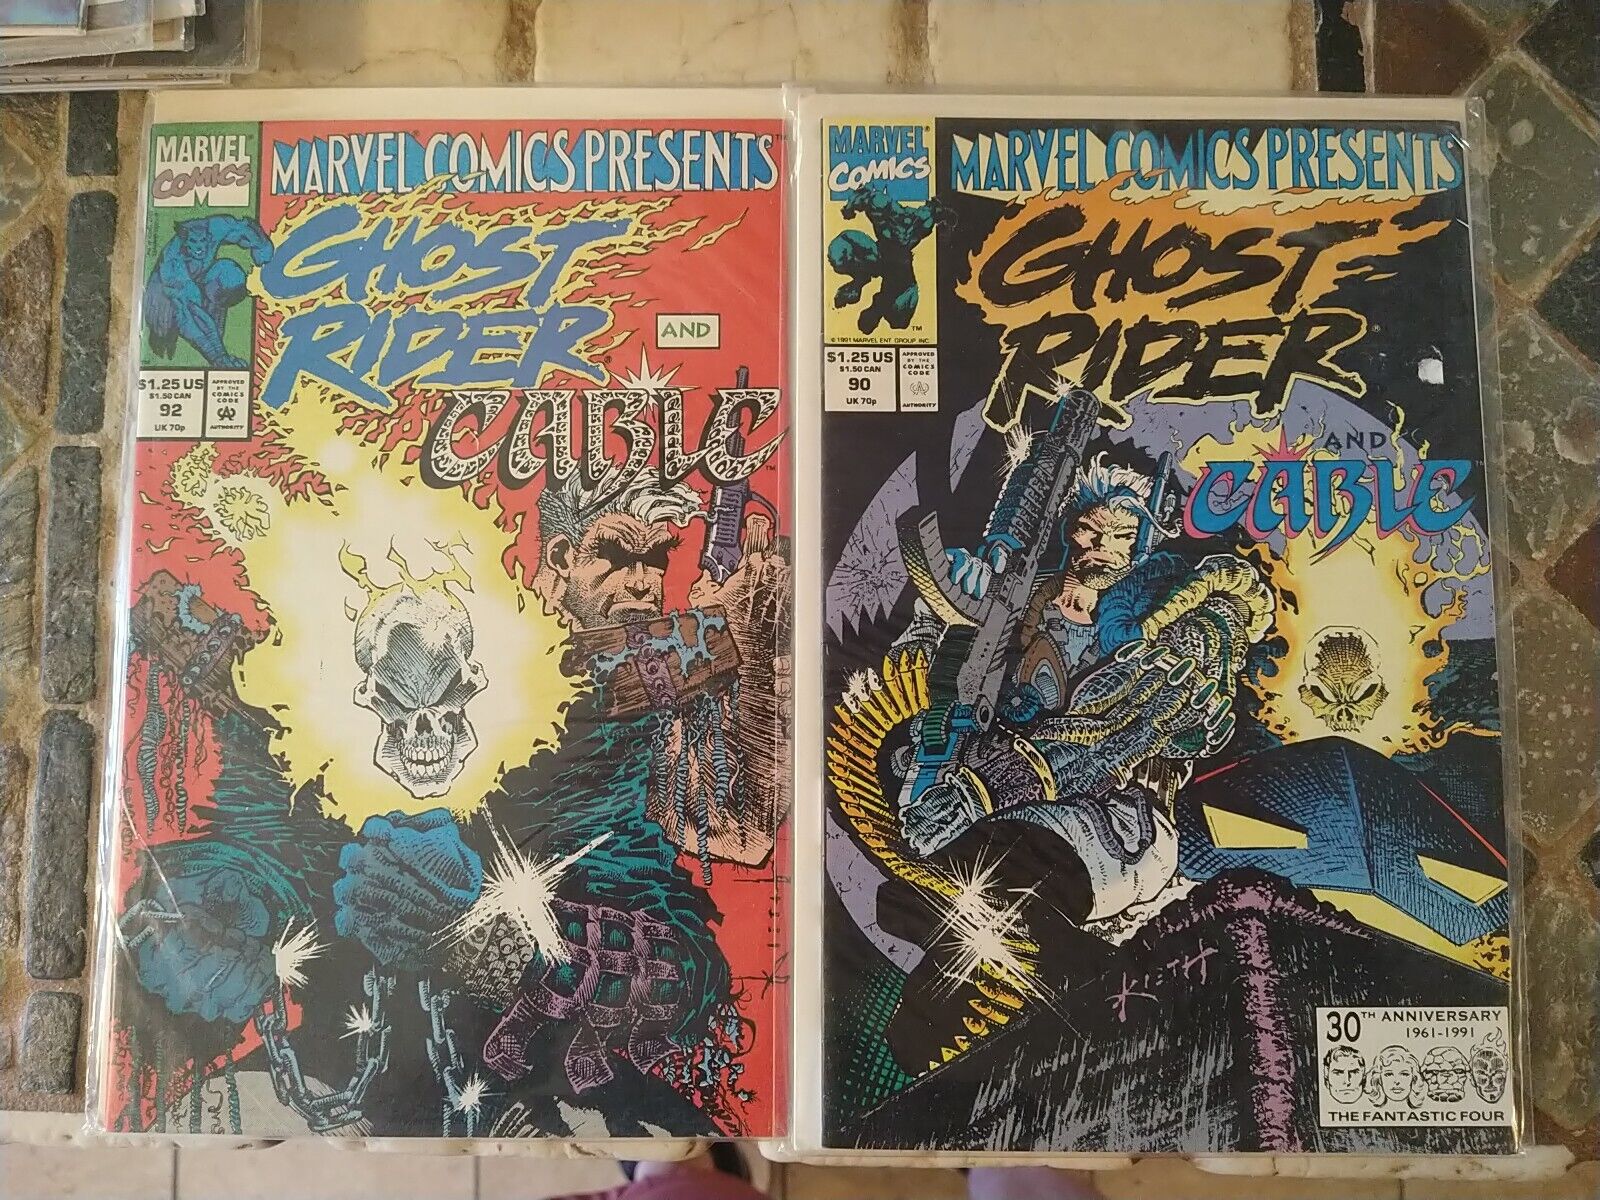 Marvel Comics Presents Ghost Rider And Cable #90 & #92 Marvel Comics